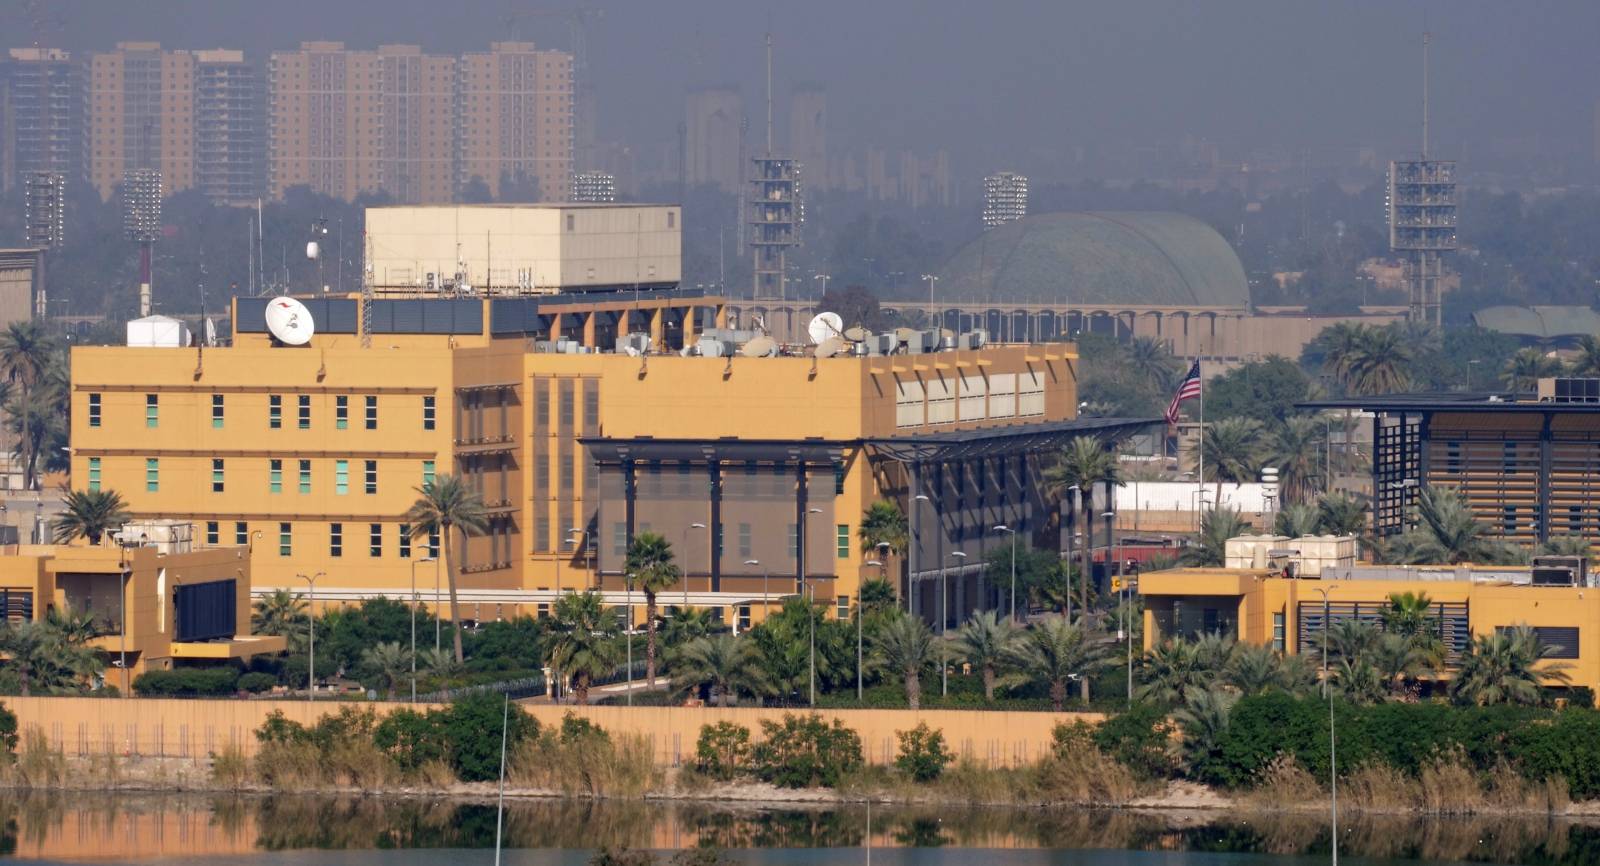 A general view of the U.S. Embassy at the Green zone in Baghdad